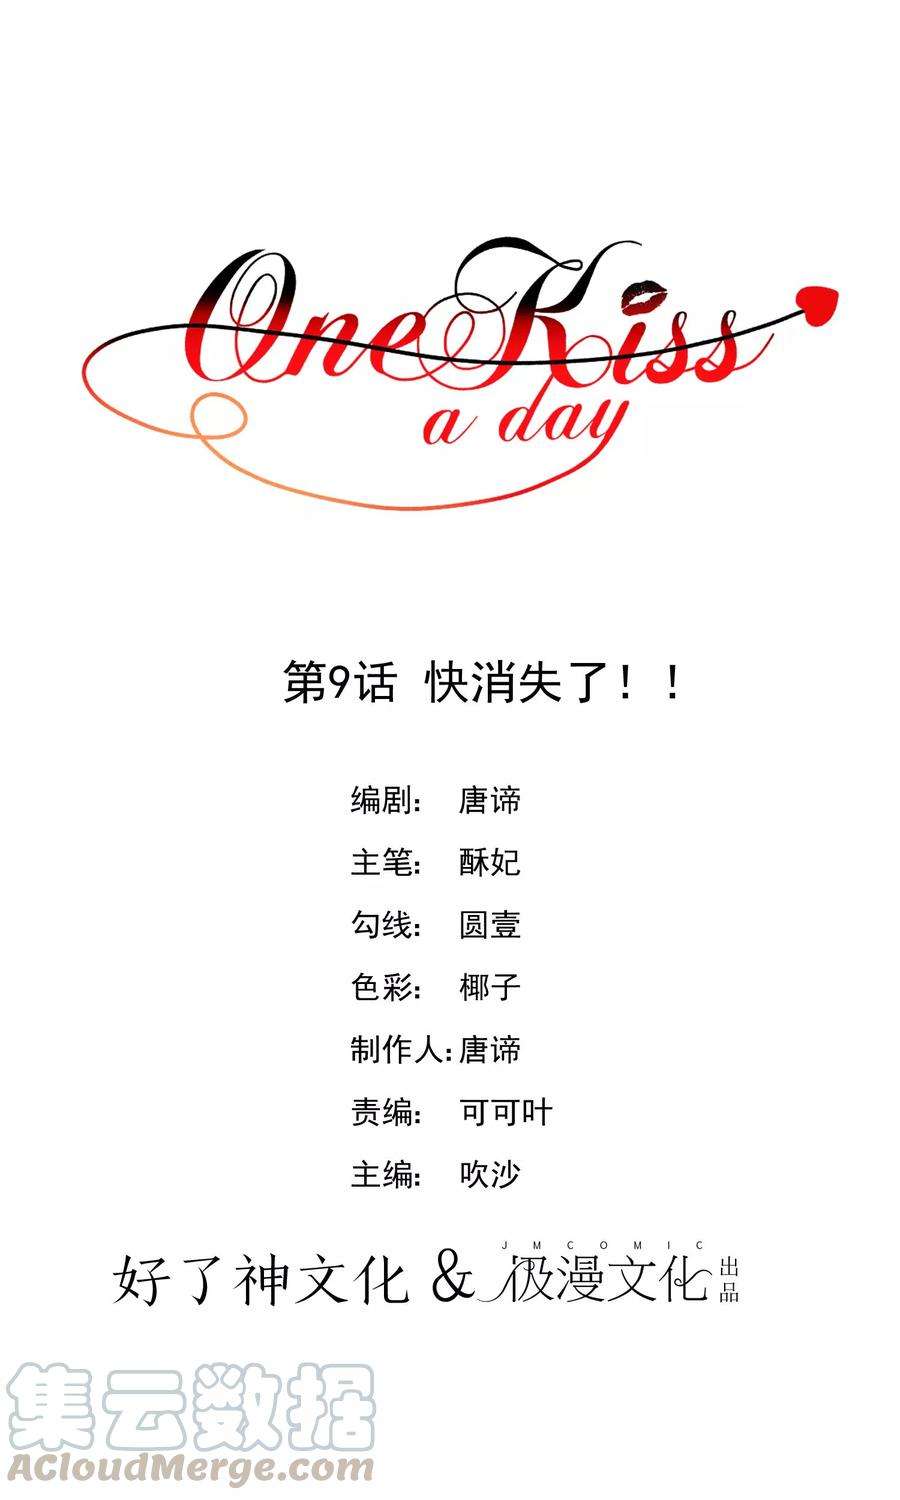 One Kiss A Day9话 快消失了！